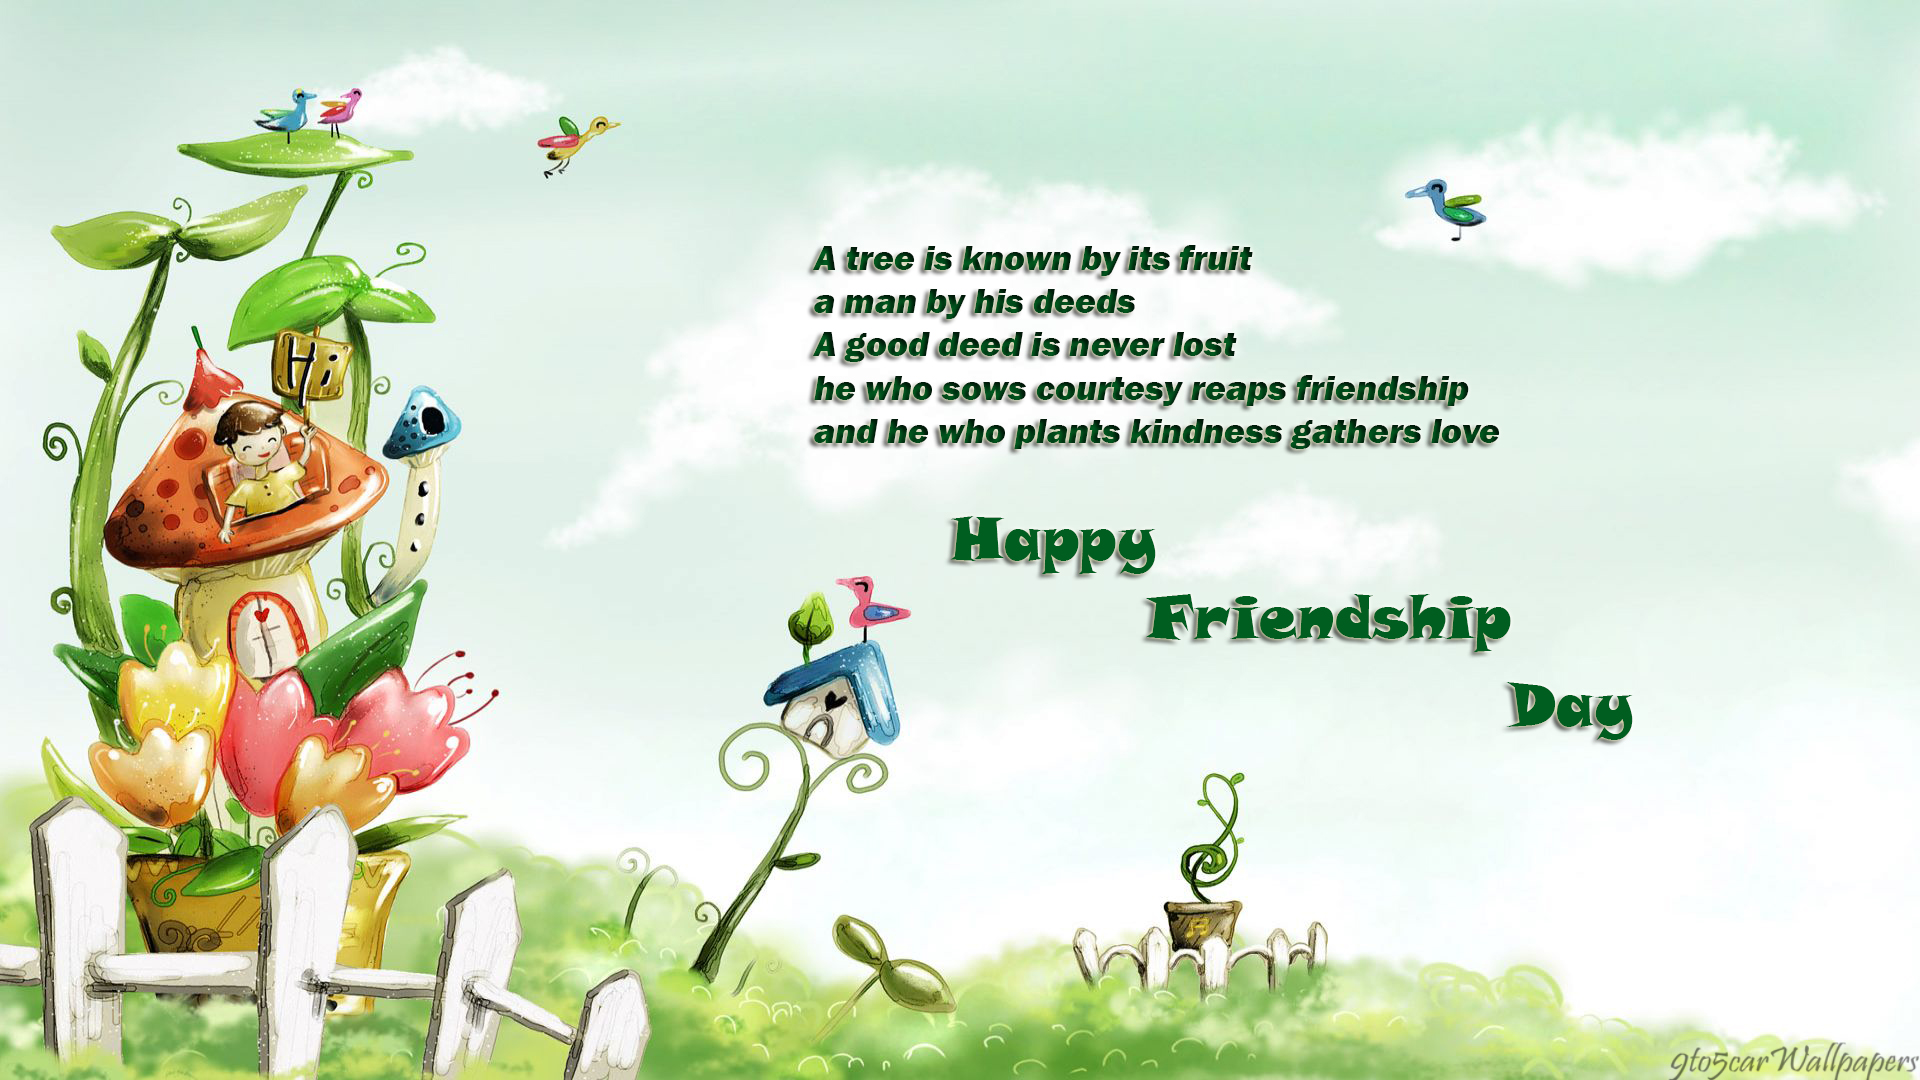 Friendship Day Quotes|Friendship Day Wishes